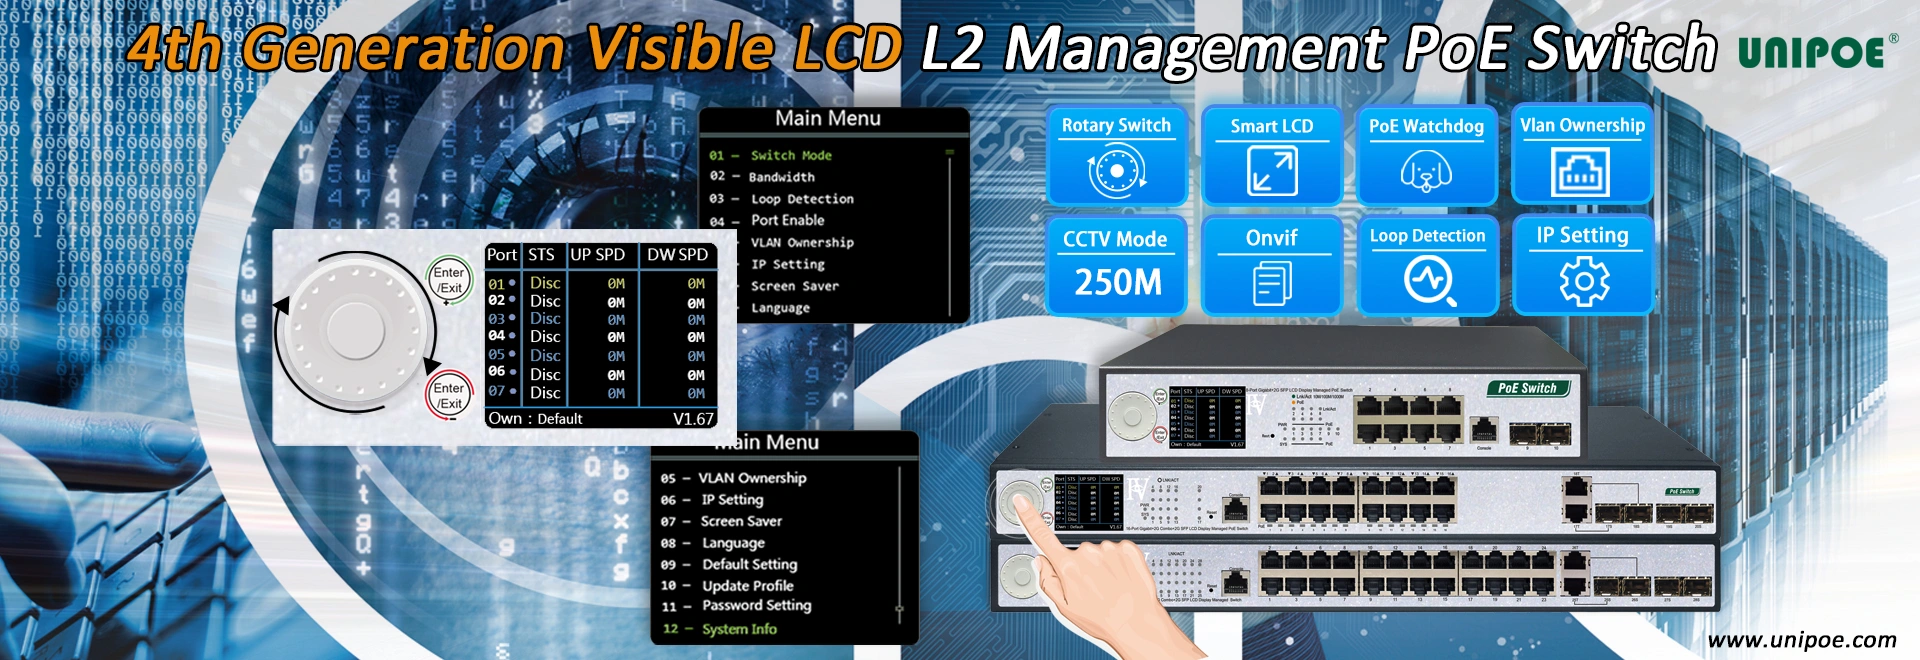 UNIPOE 4th Generation Visible LCD L2 Management PoE Switch